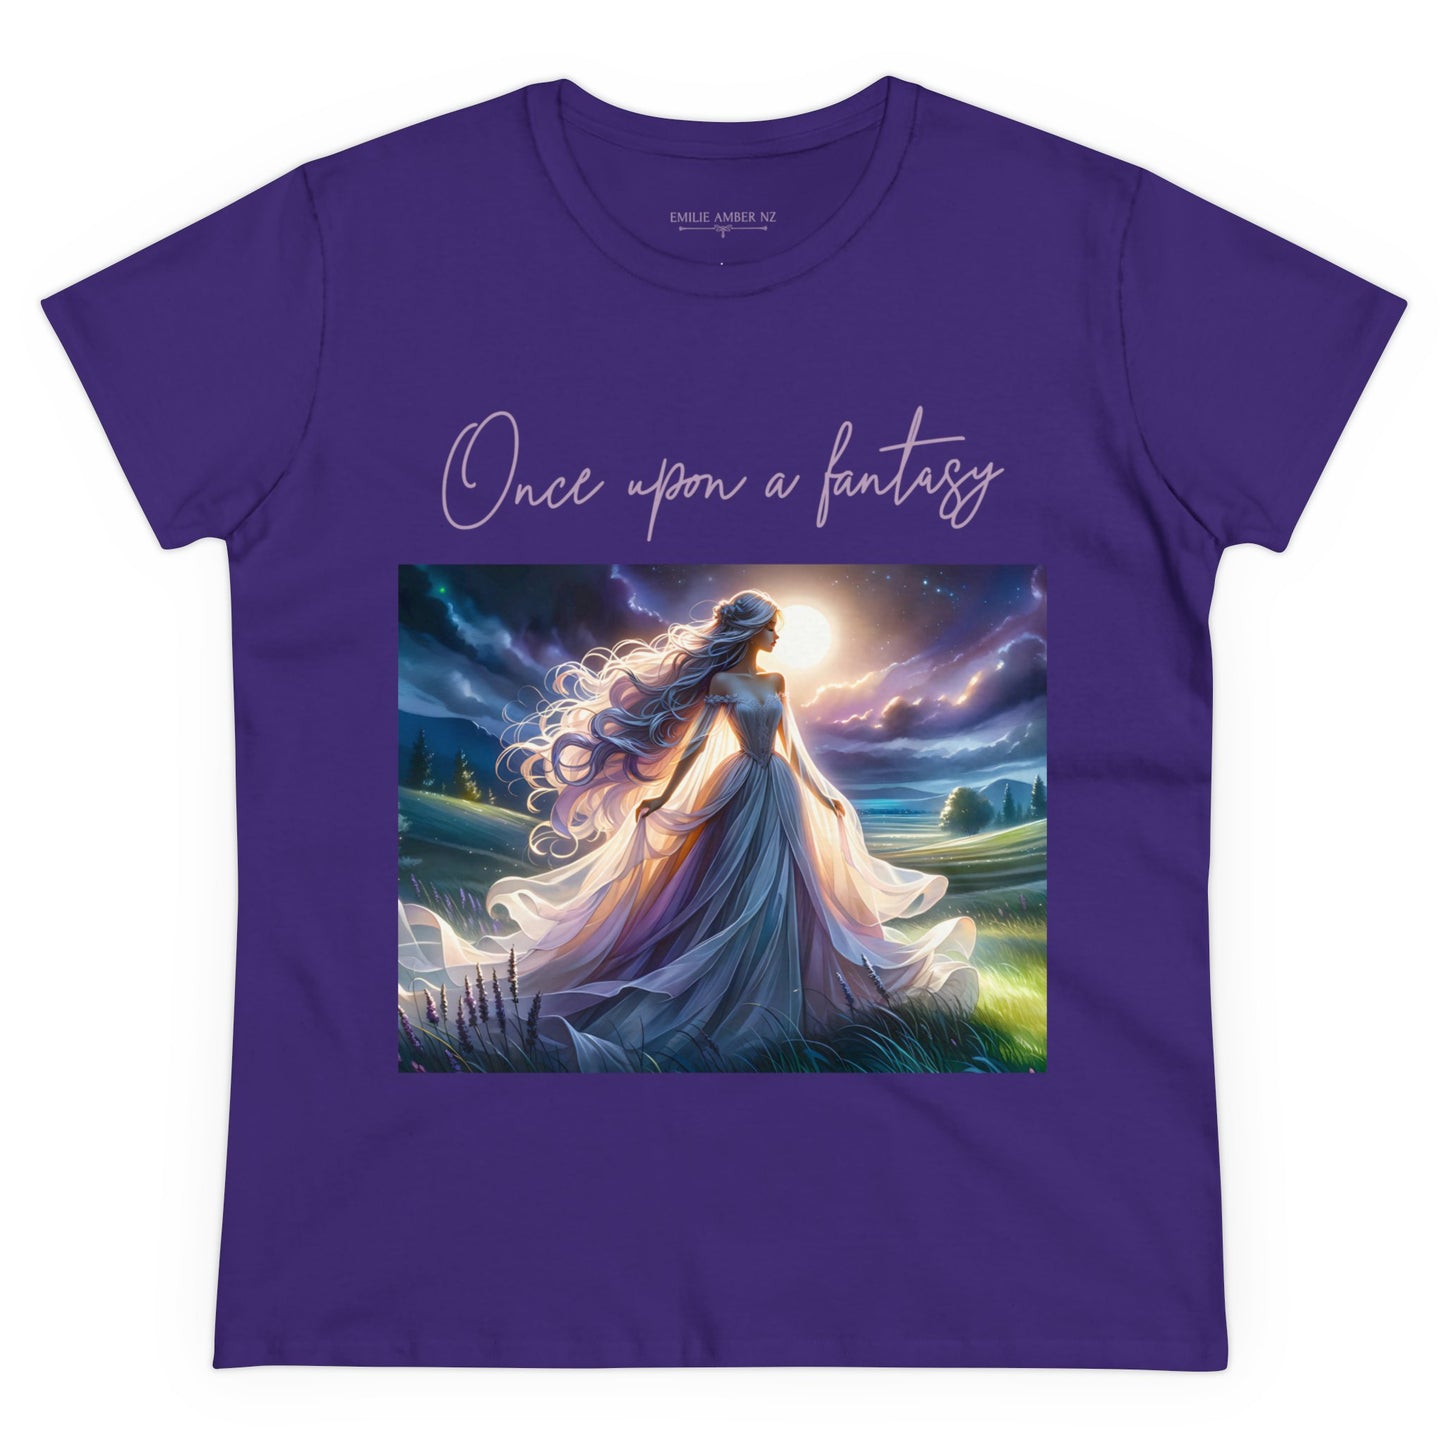 Once Upon A Fantasy - Silver Moonlight Woman's Cotton T-Shirt